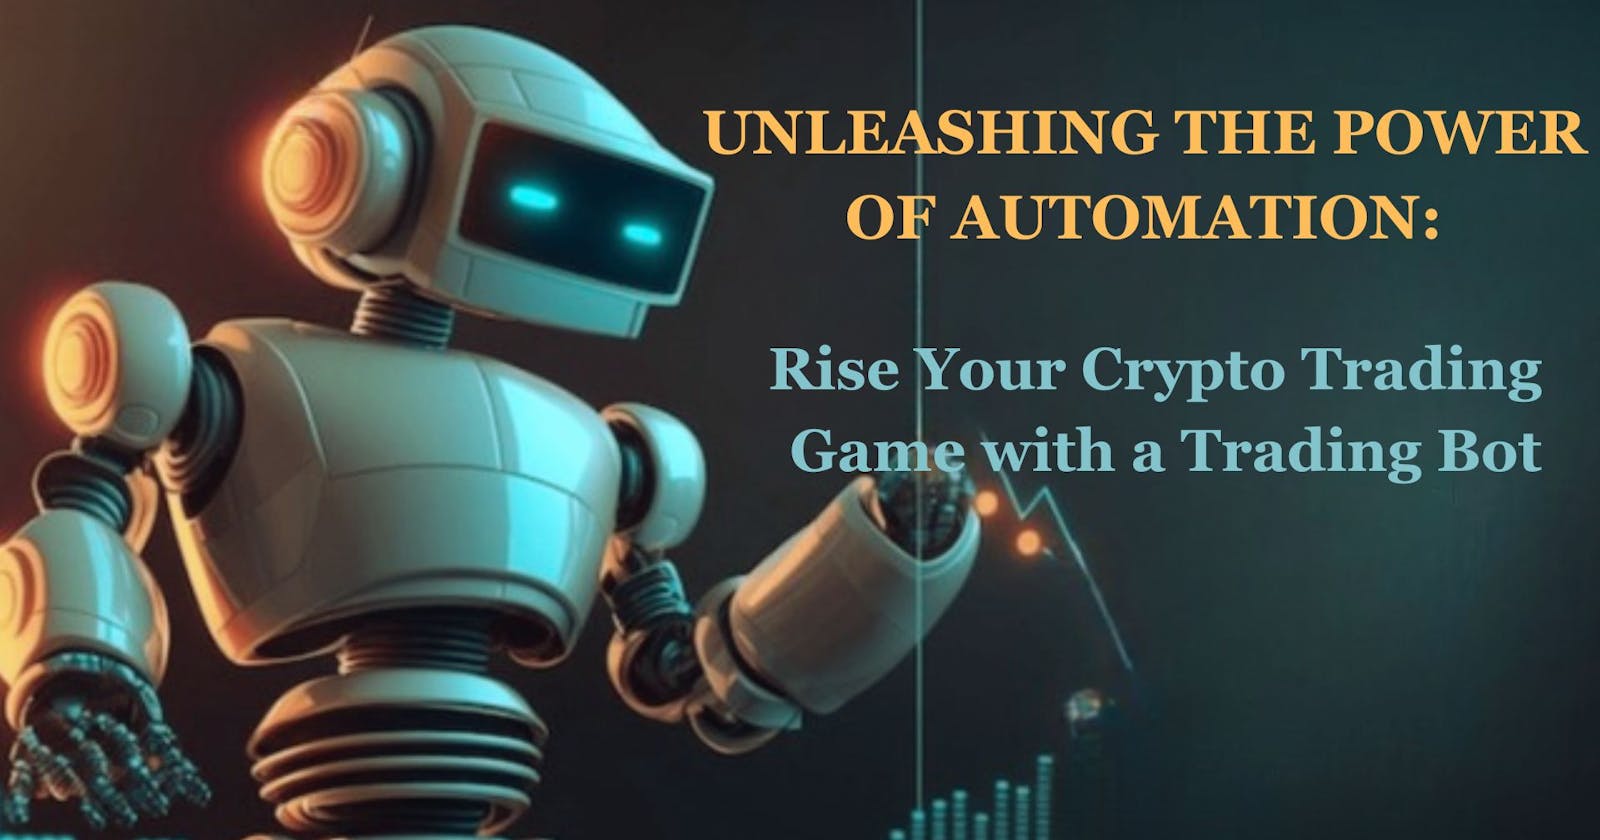 Unleashing the Power of Automation: Rise Your Crypto Trading Game with a Trading Bot